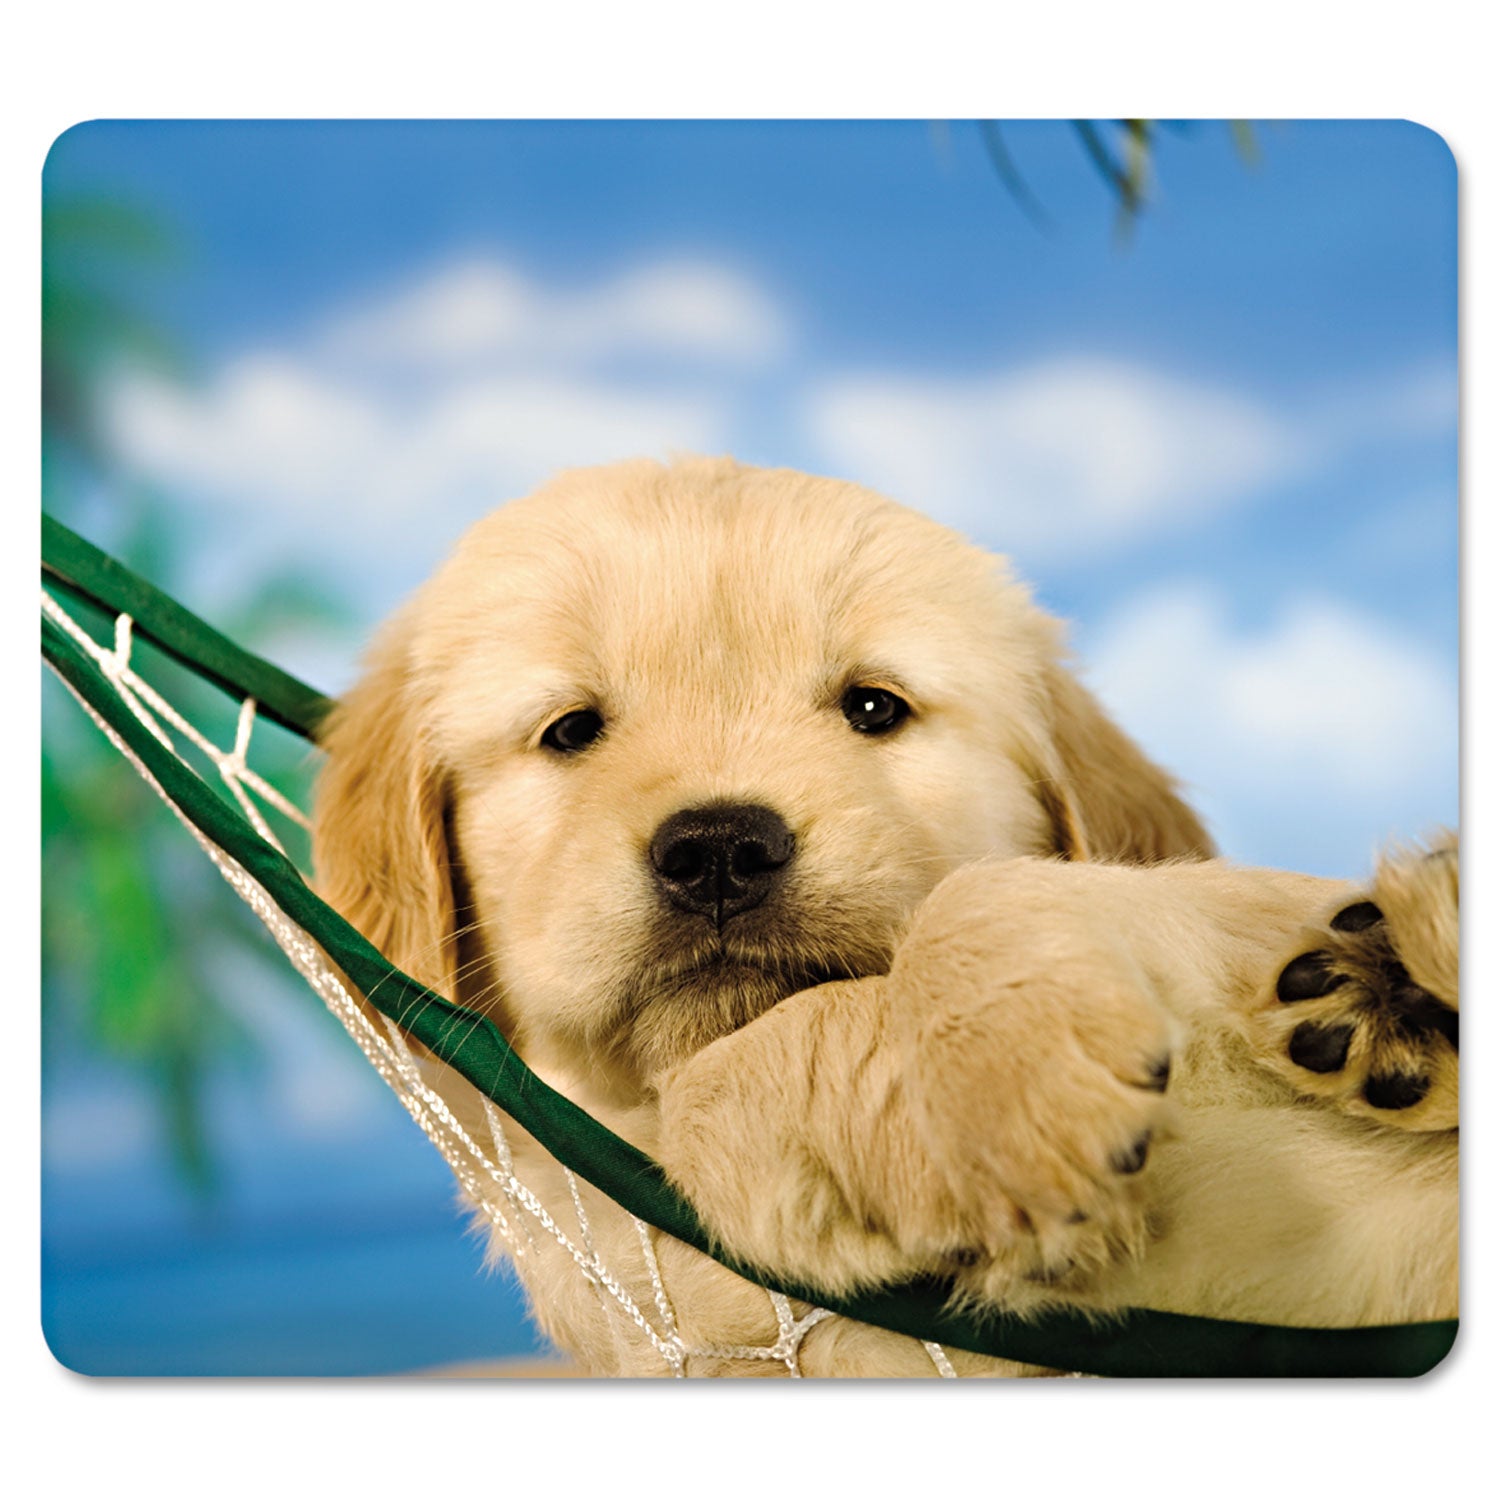 Recycled Mouse Pad, 9 x 8, Puppy in Hammock Design - 